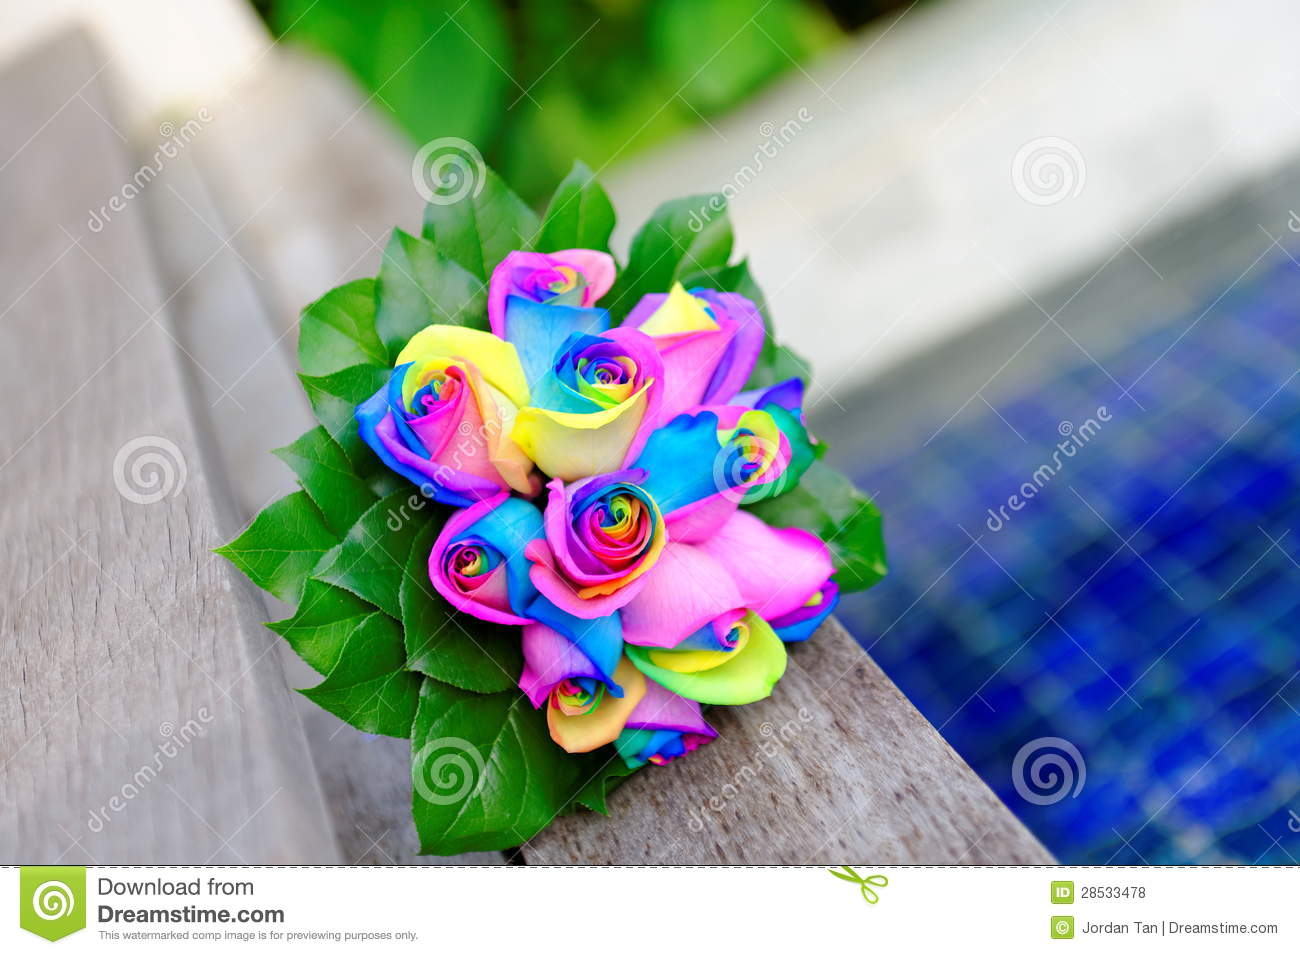 Bouquet Of Rainbow Colored Roses Royalty Free Stock Photos   Image    